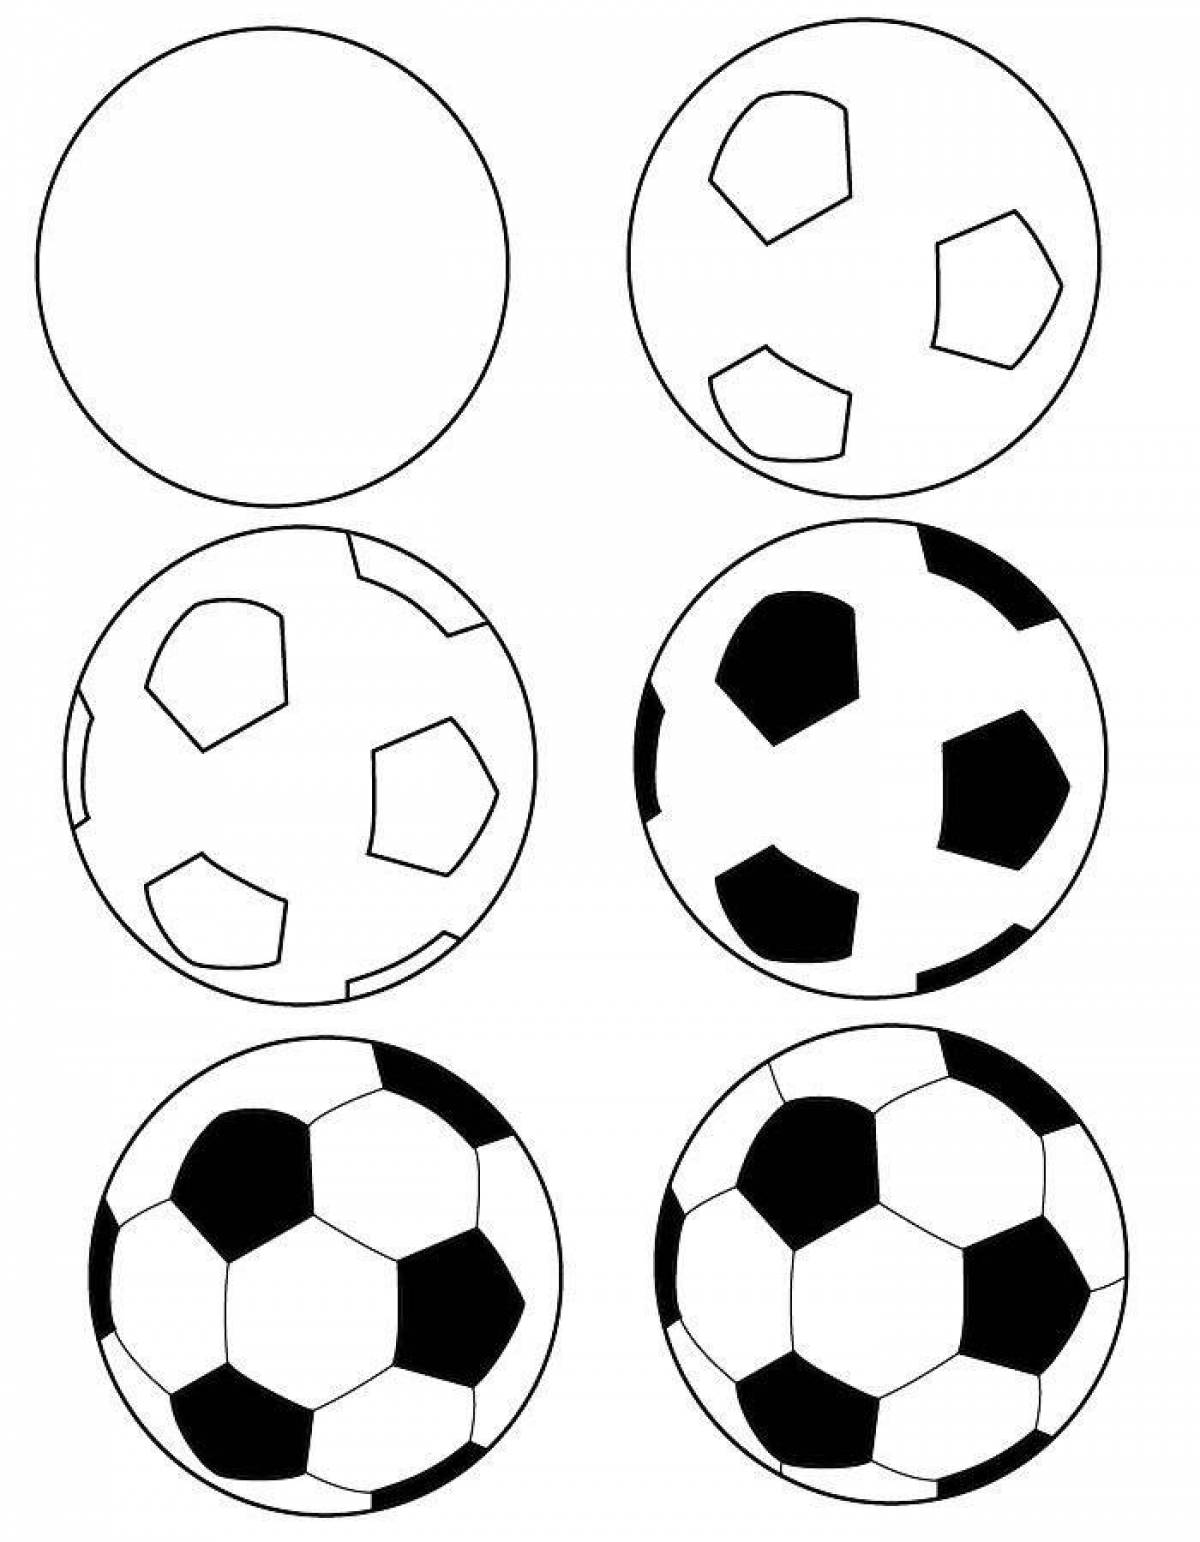 Coloring the incredible soccer ball